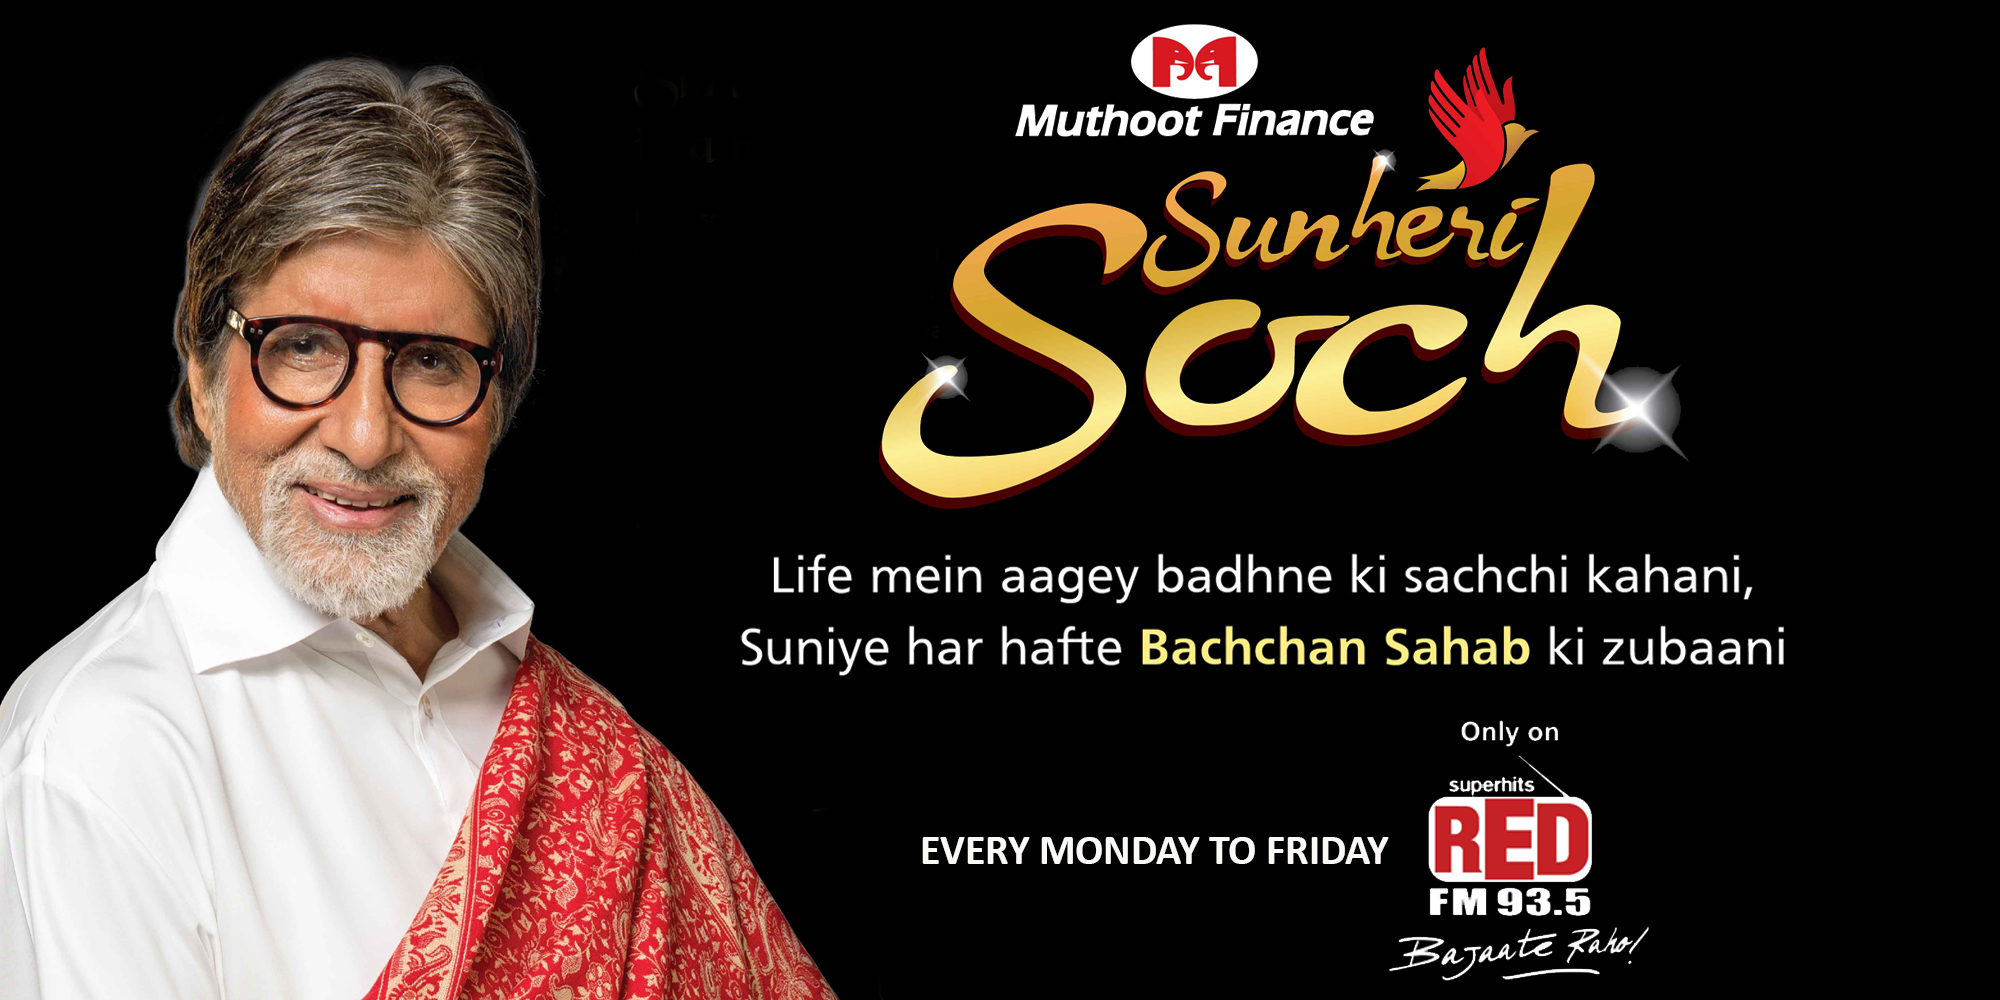 Muthoot Finance launches ‘Sunheri Soch’ with Red FM